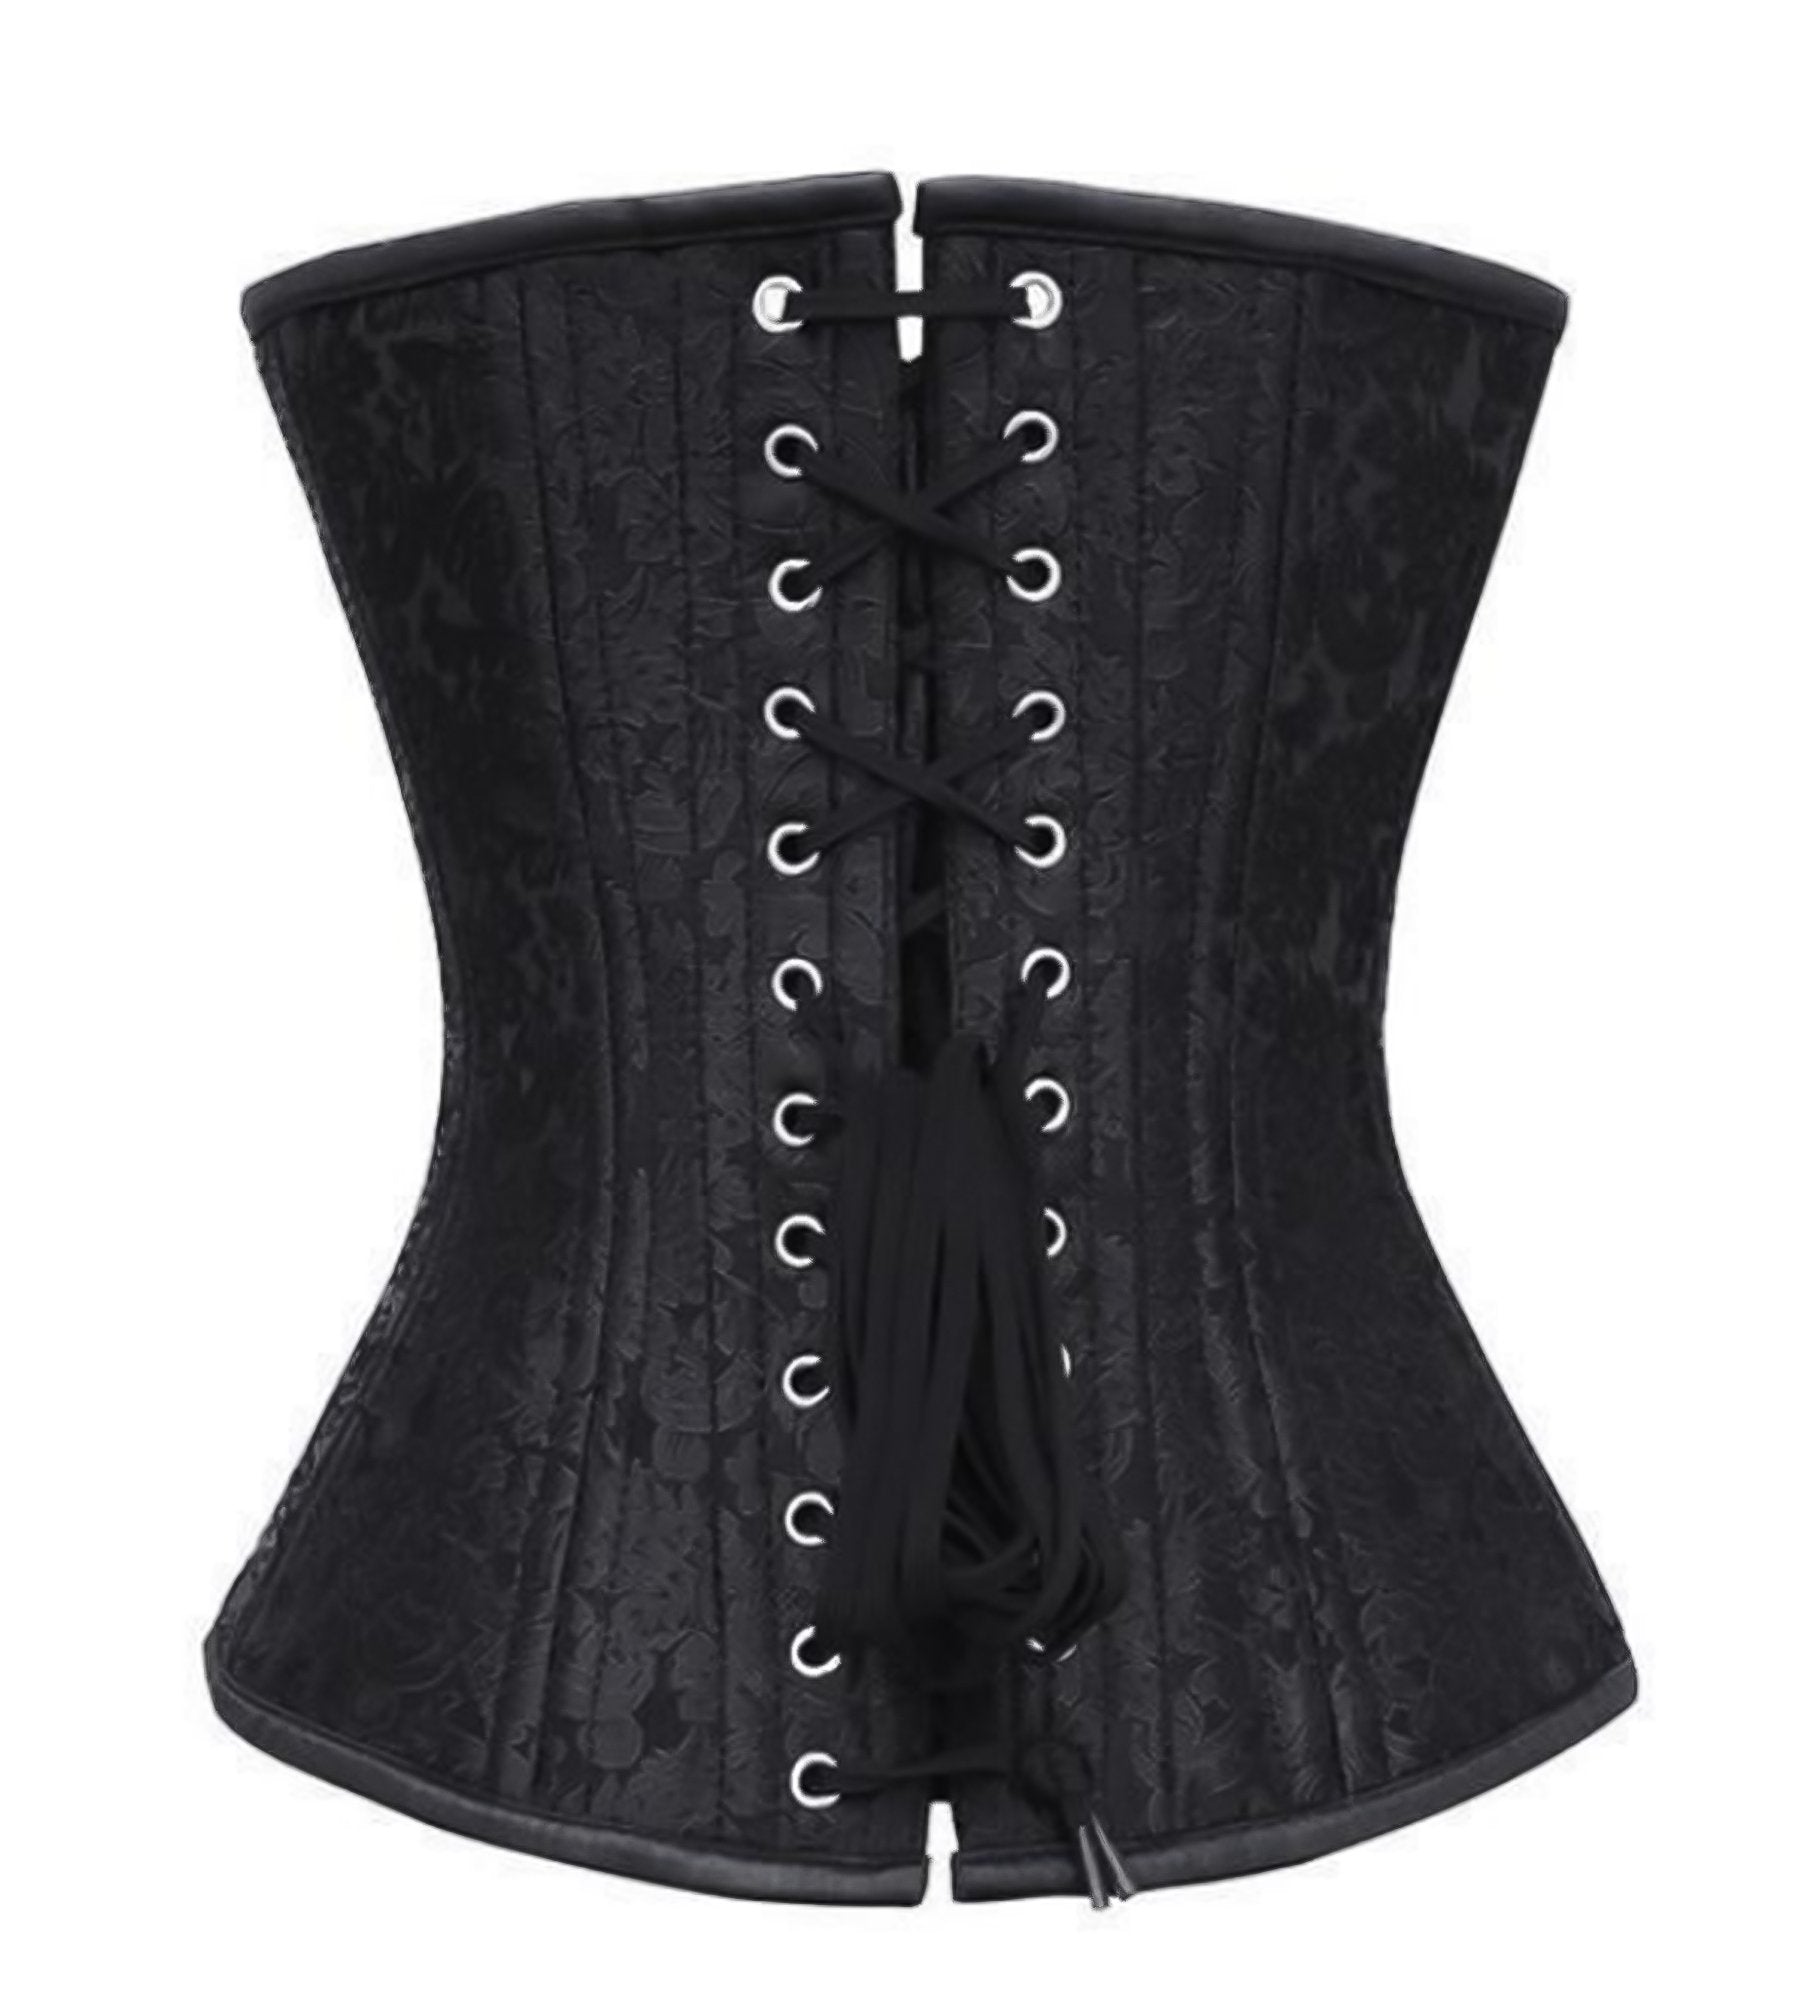 Choices of Bespoke Corsets and Overbust Black Corset available here